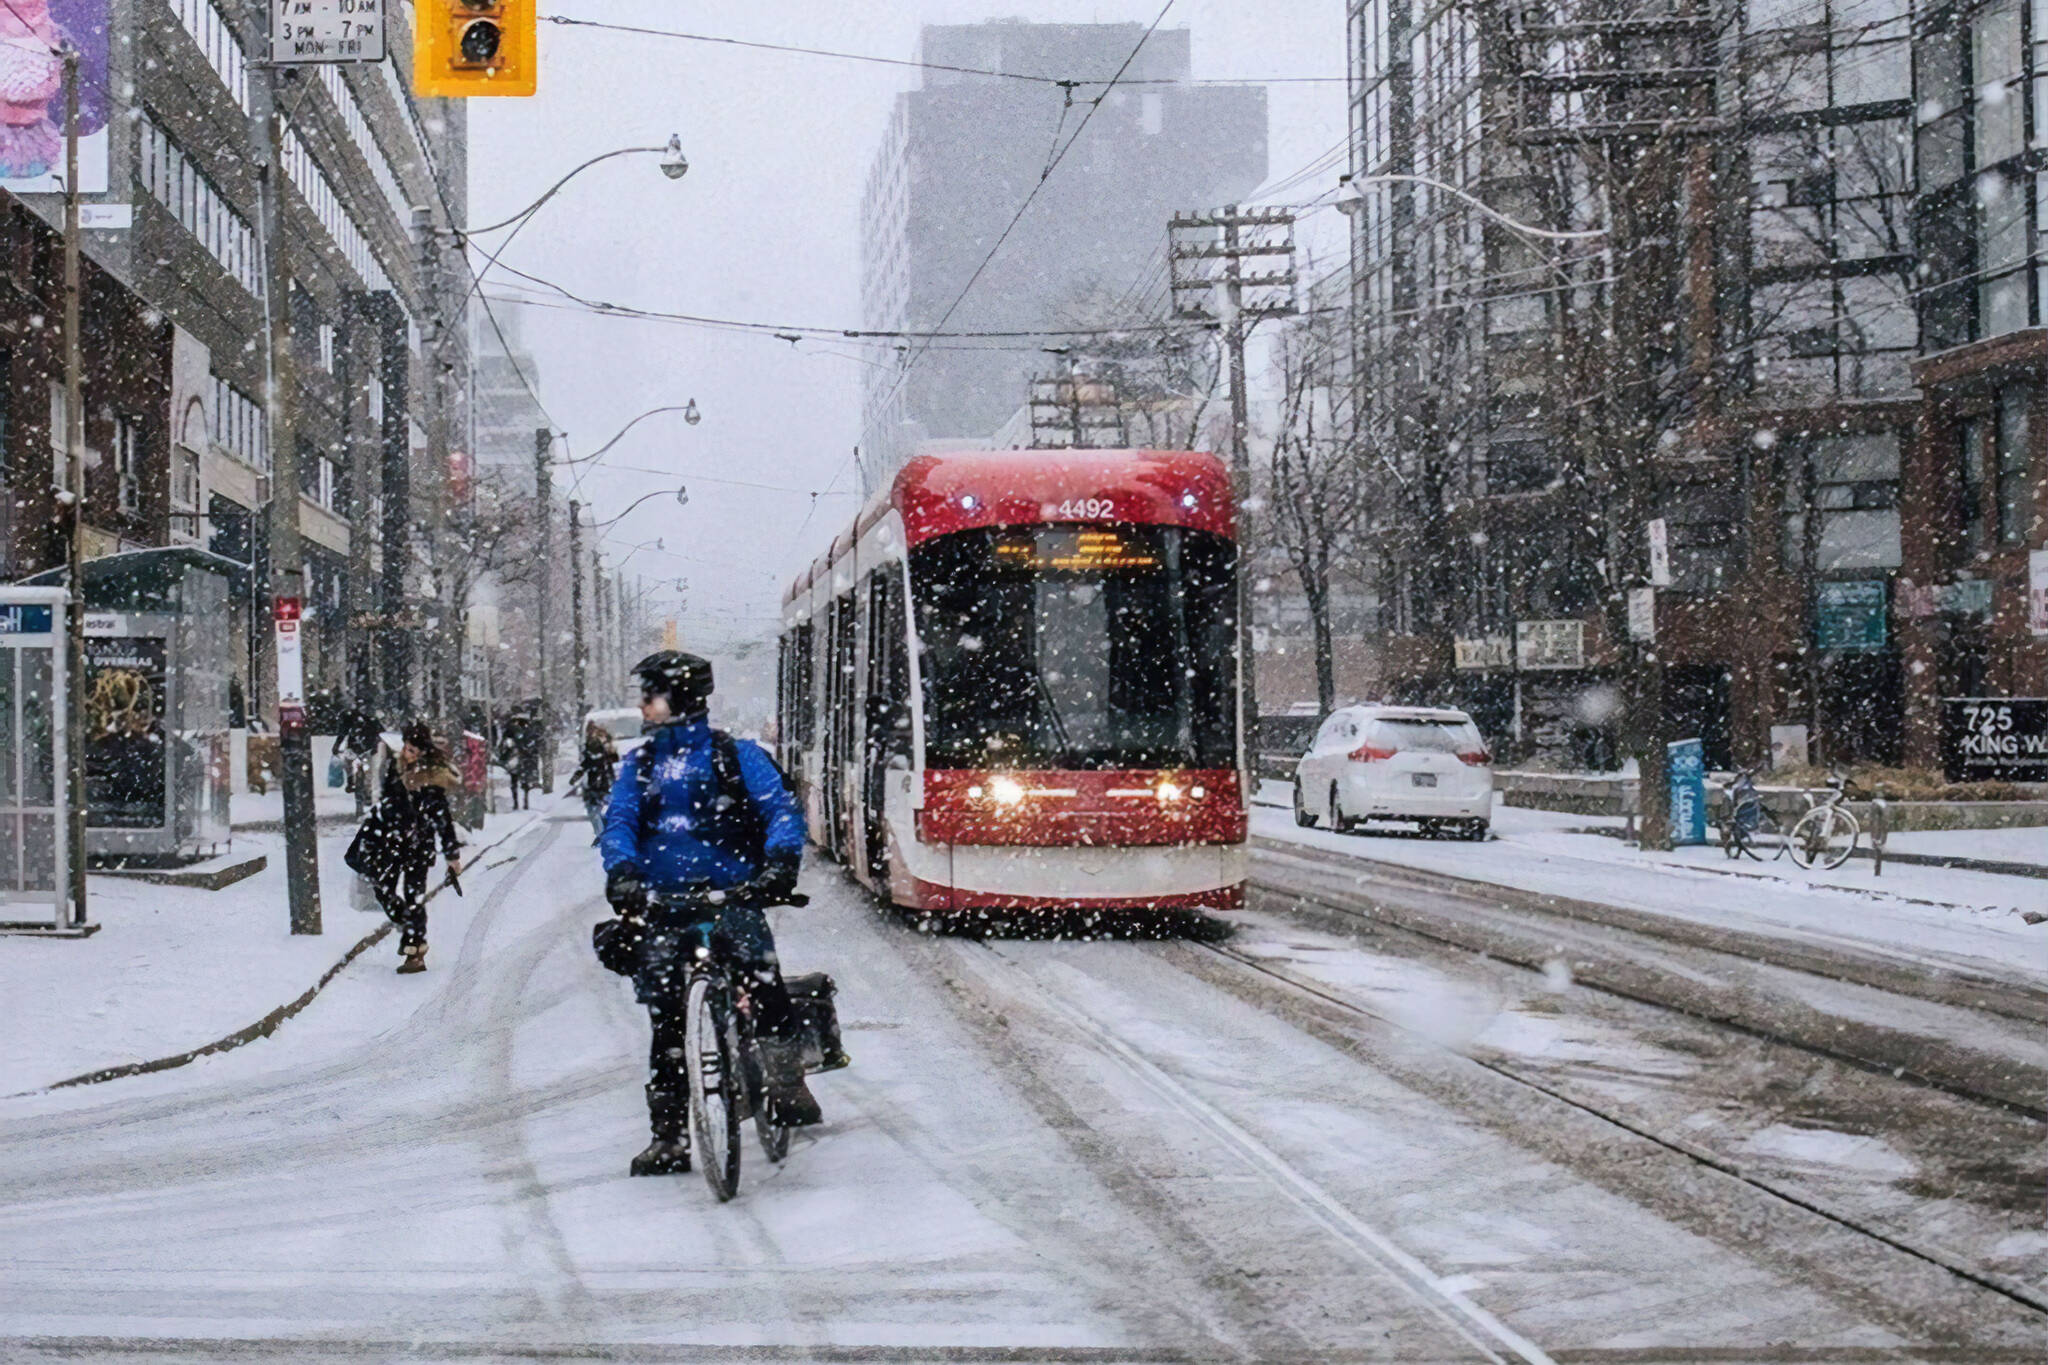 Environment Canada issues special weather statement for Toronto ahead of snow storm